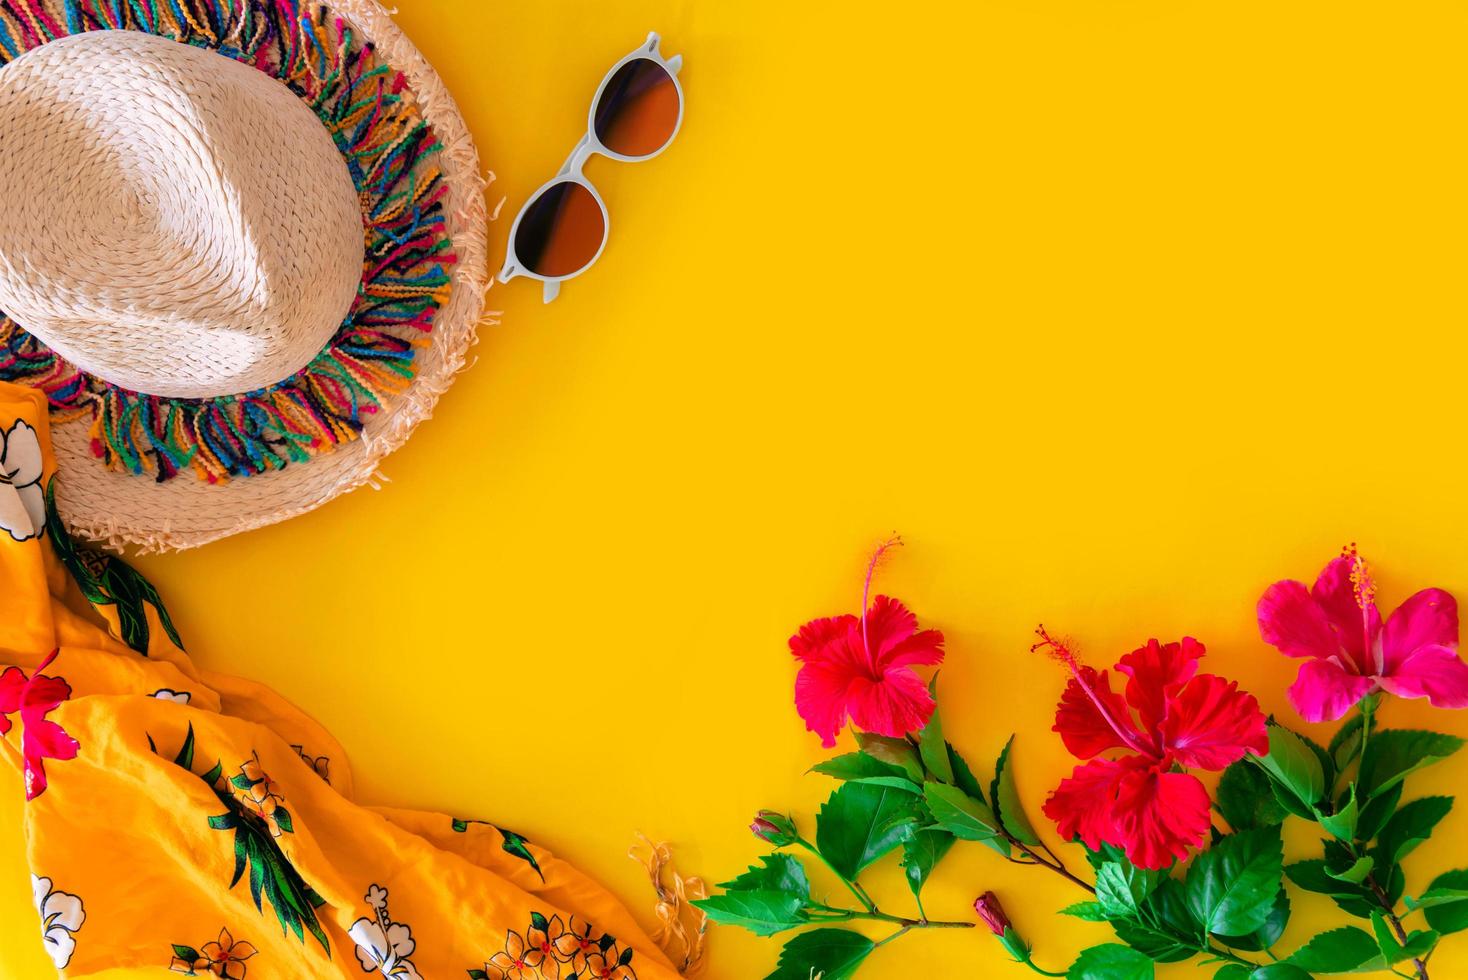 Beach accessories For the traveler on the yellow background - sunglasses, Straw hat and hibiscus flowers. Beach tourism concept. summer photo